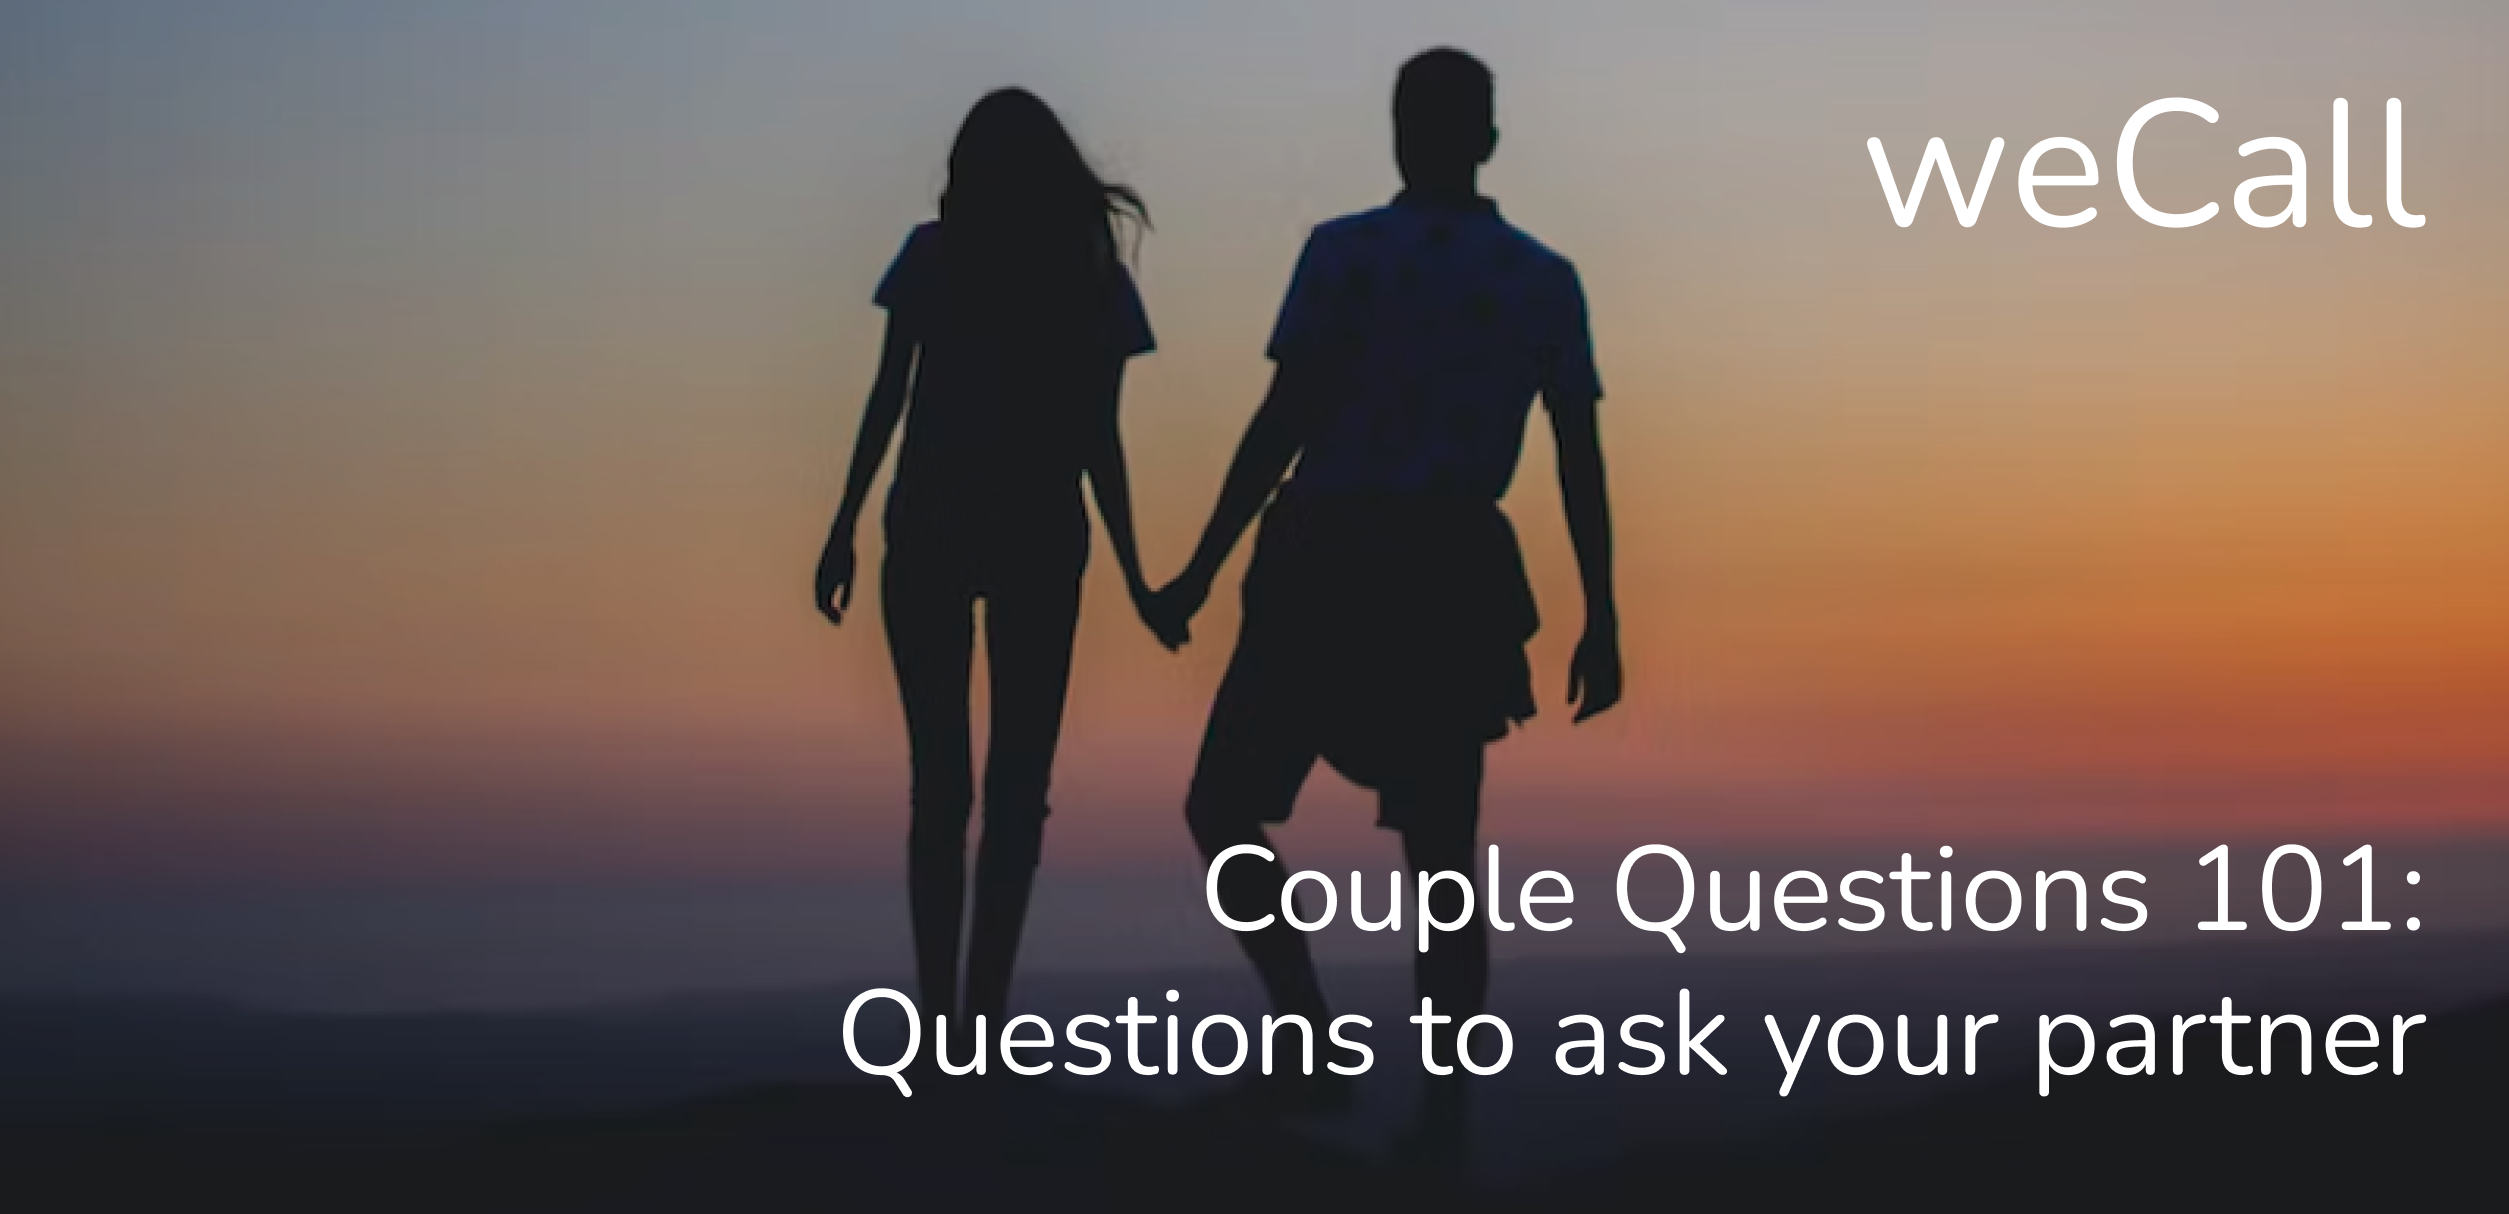 love questions images